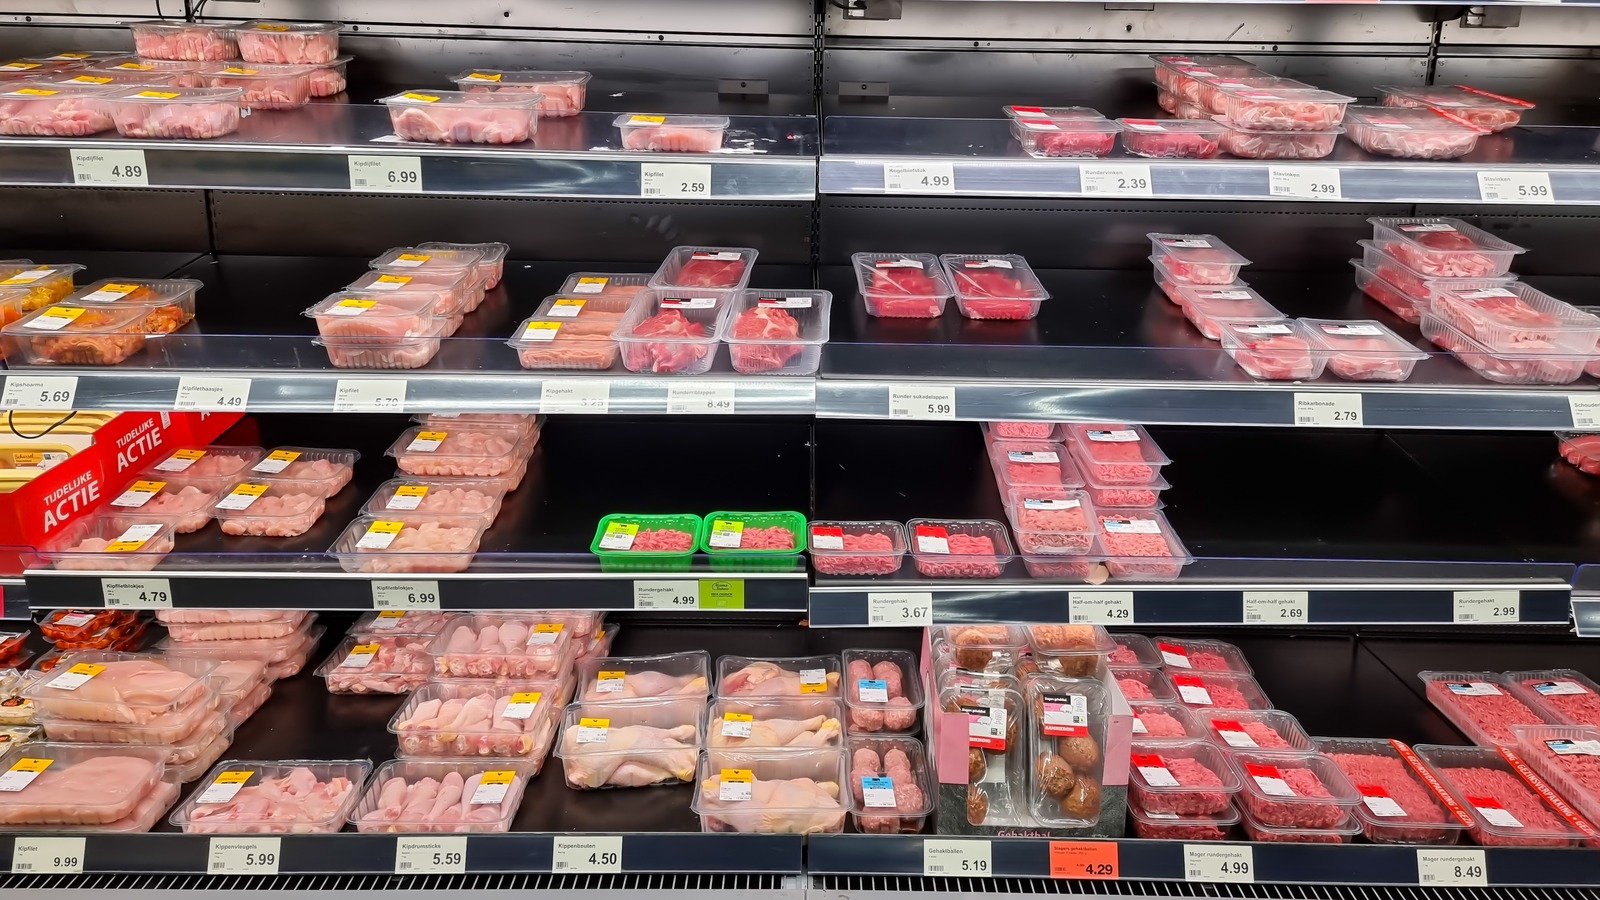 Where's the beef? The rush is on for meat, but stores say not to worry